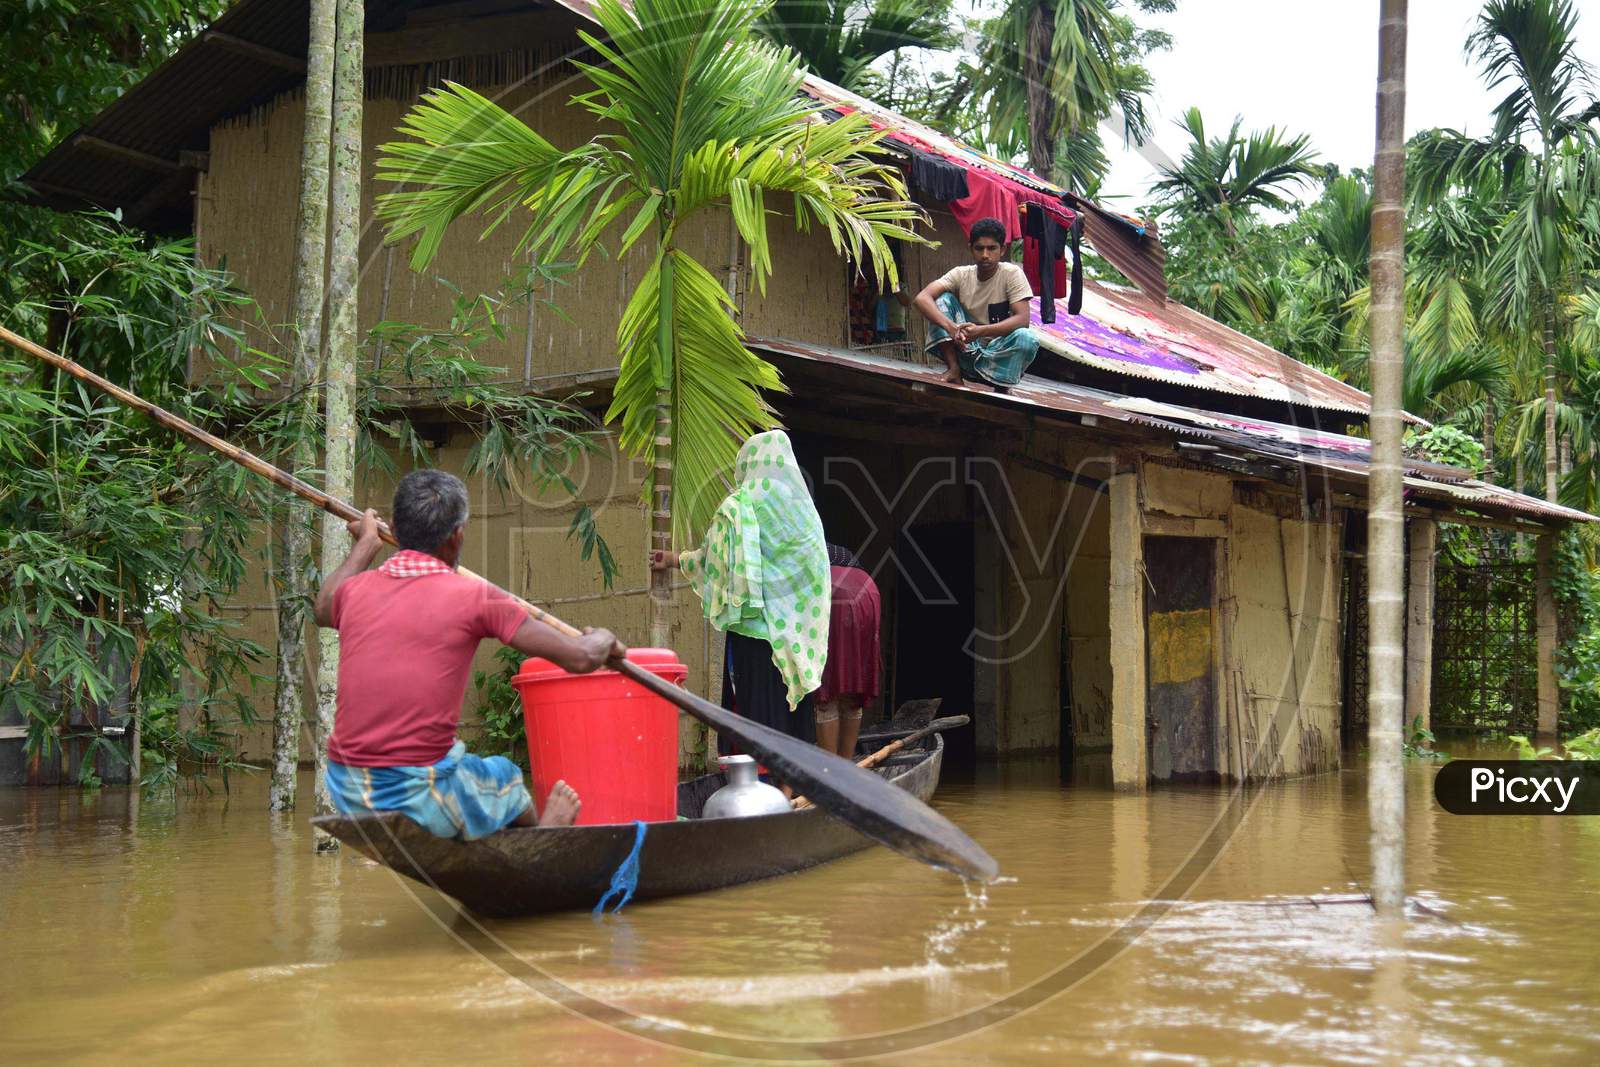 Villagers Are Transported On A Boat Towards A Safer Place  At Flood Affected Bakulguri Village Near Kampur In Nagaon District Of Assam On May 27,2020